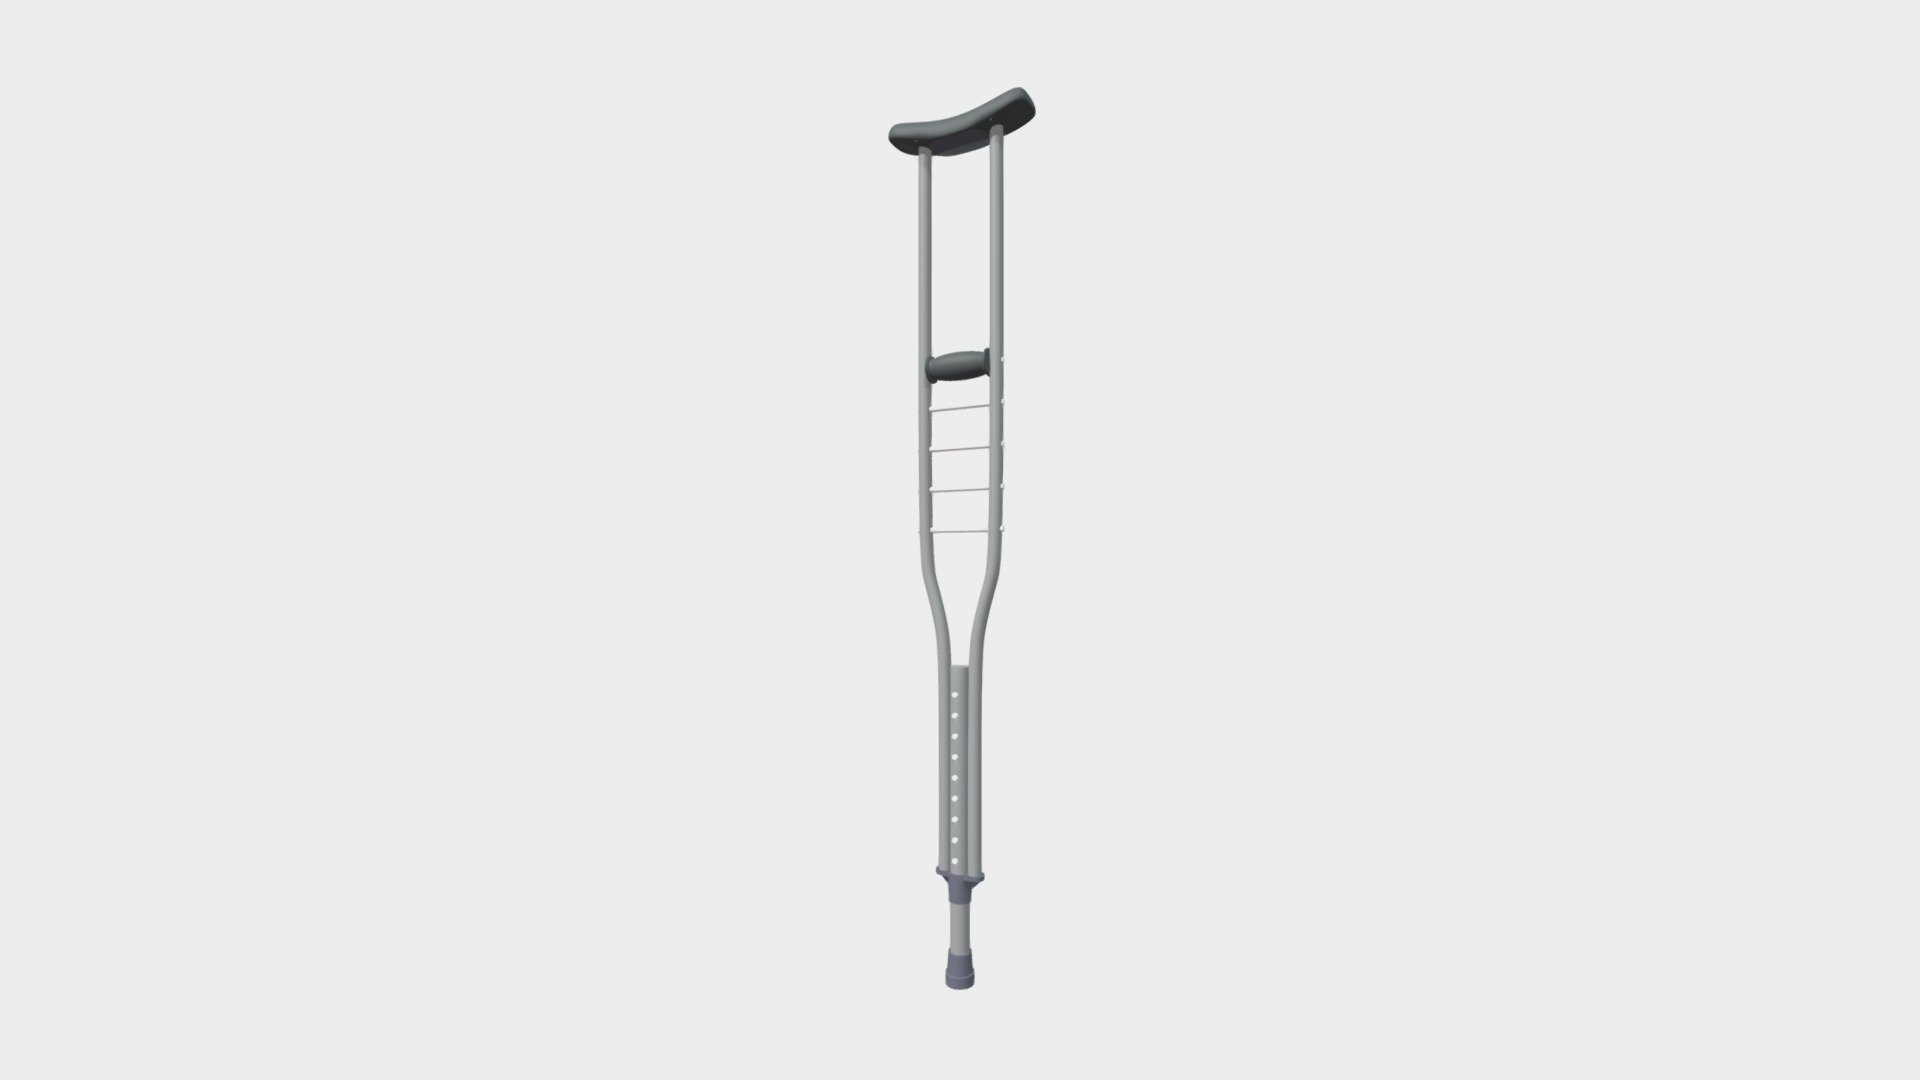 Plain old crutch model that I whipped up as tribute to my broken foot 3d model